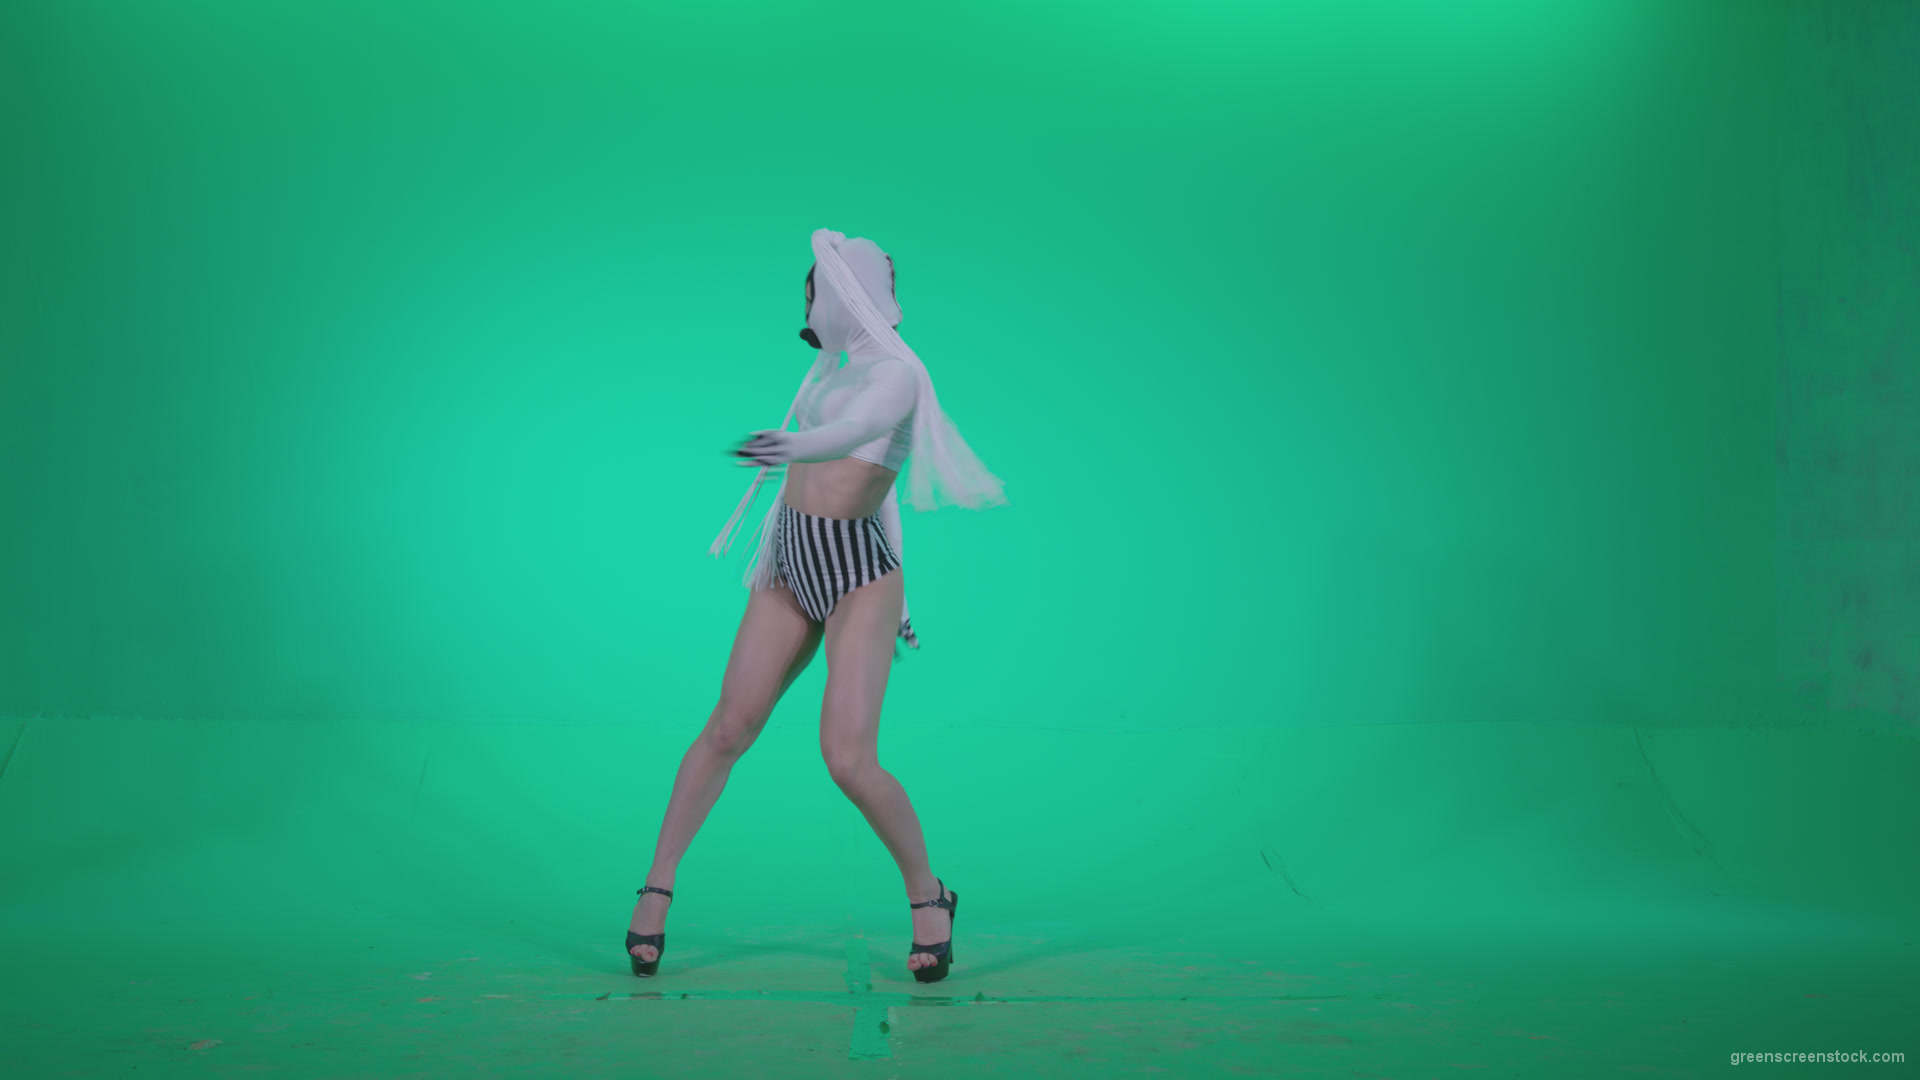 Go-go-Dancer-with-Latex-Top-t7-Green-Screen-Video-Footage_006 Green Screen Stock